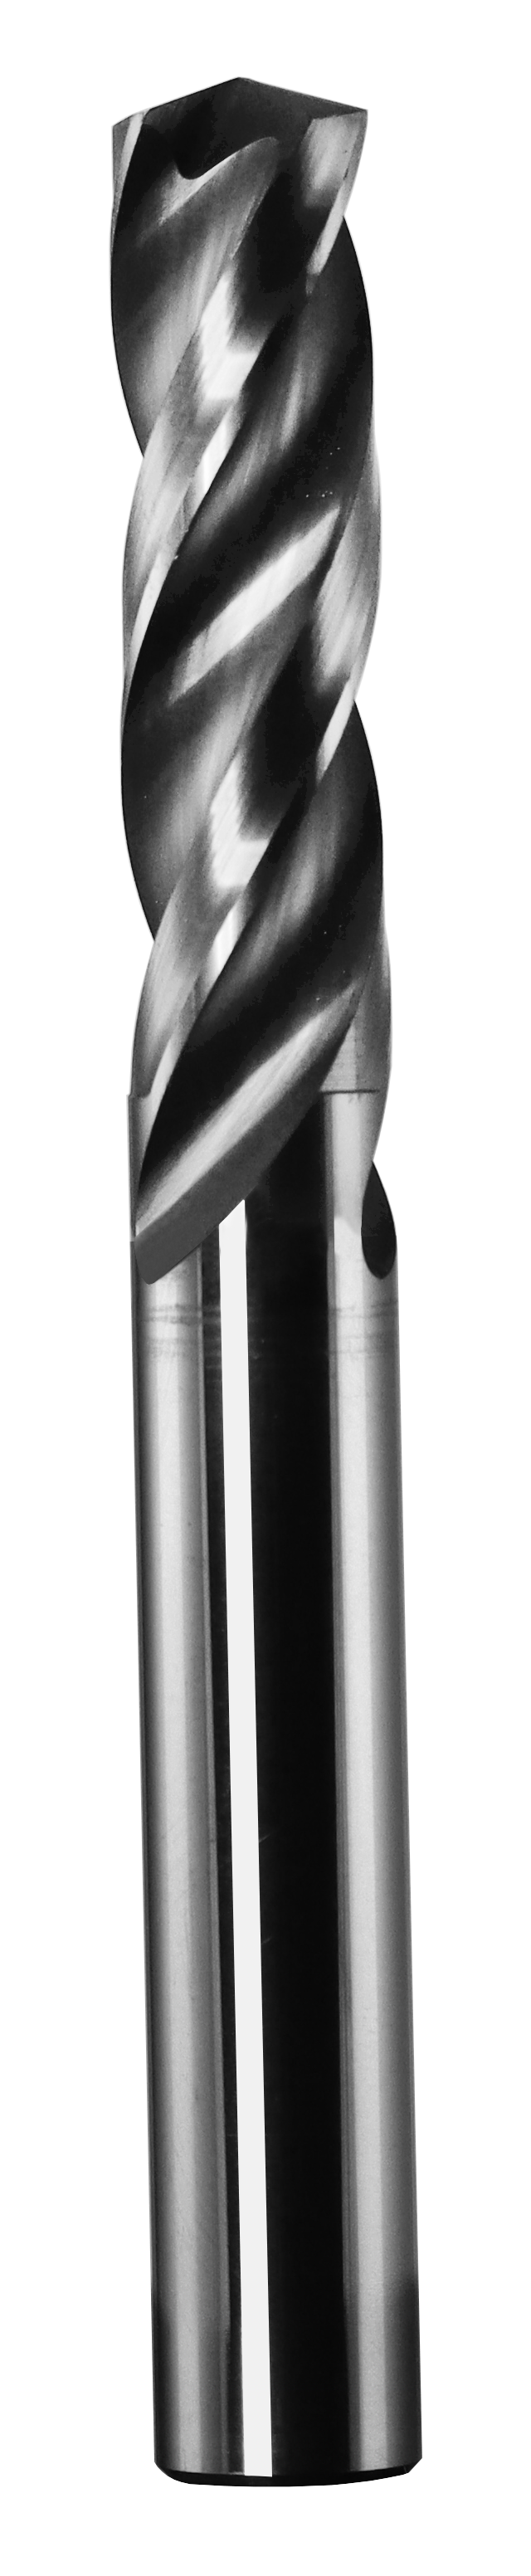 3.20mm Dia, 150 Degree Point, Solid Carbide Drill - 63045